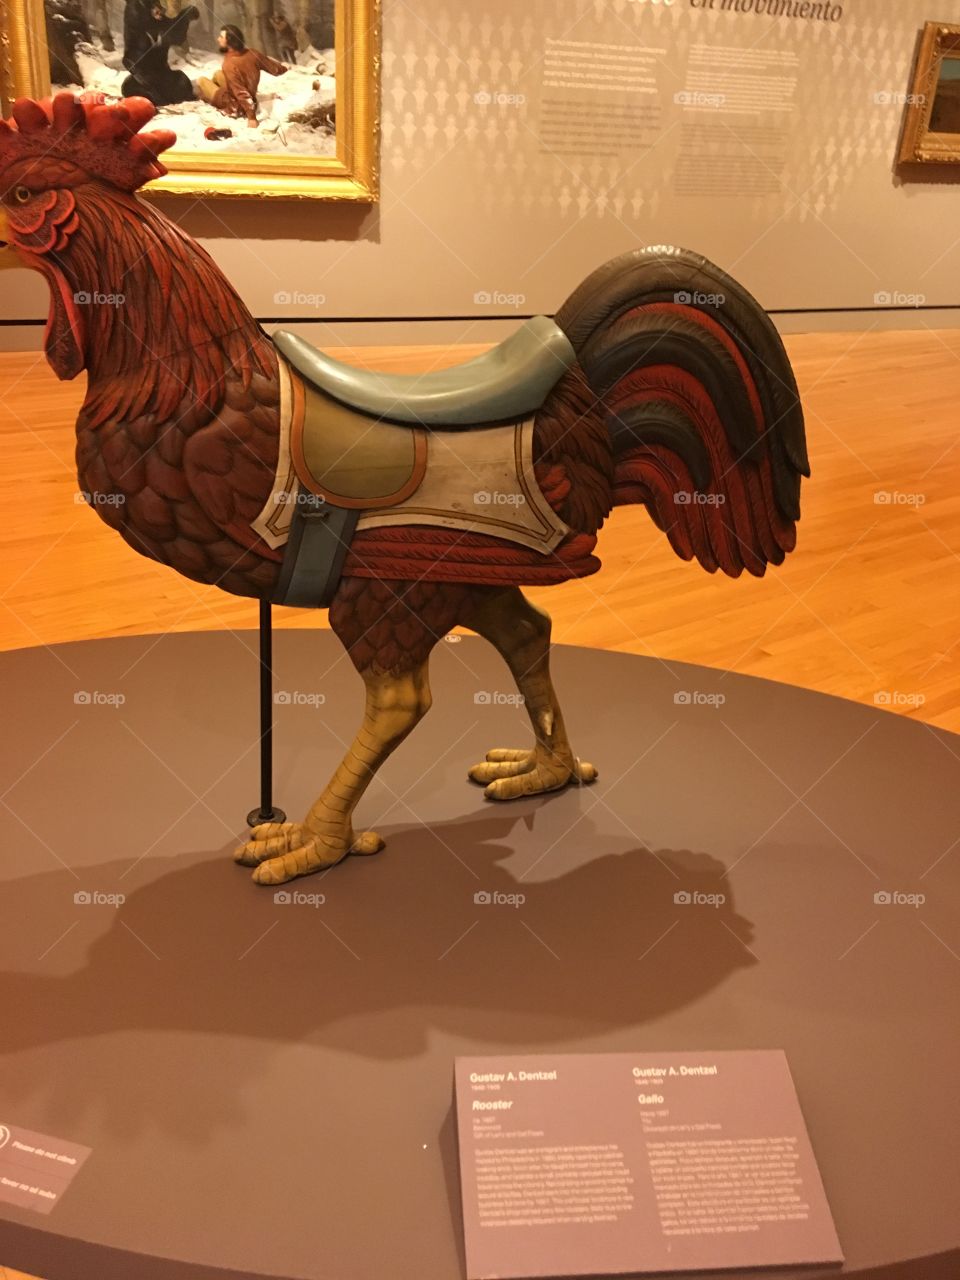 Even got a great big rooster in the middle of one of the rooms. Cock a doodle do!